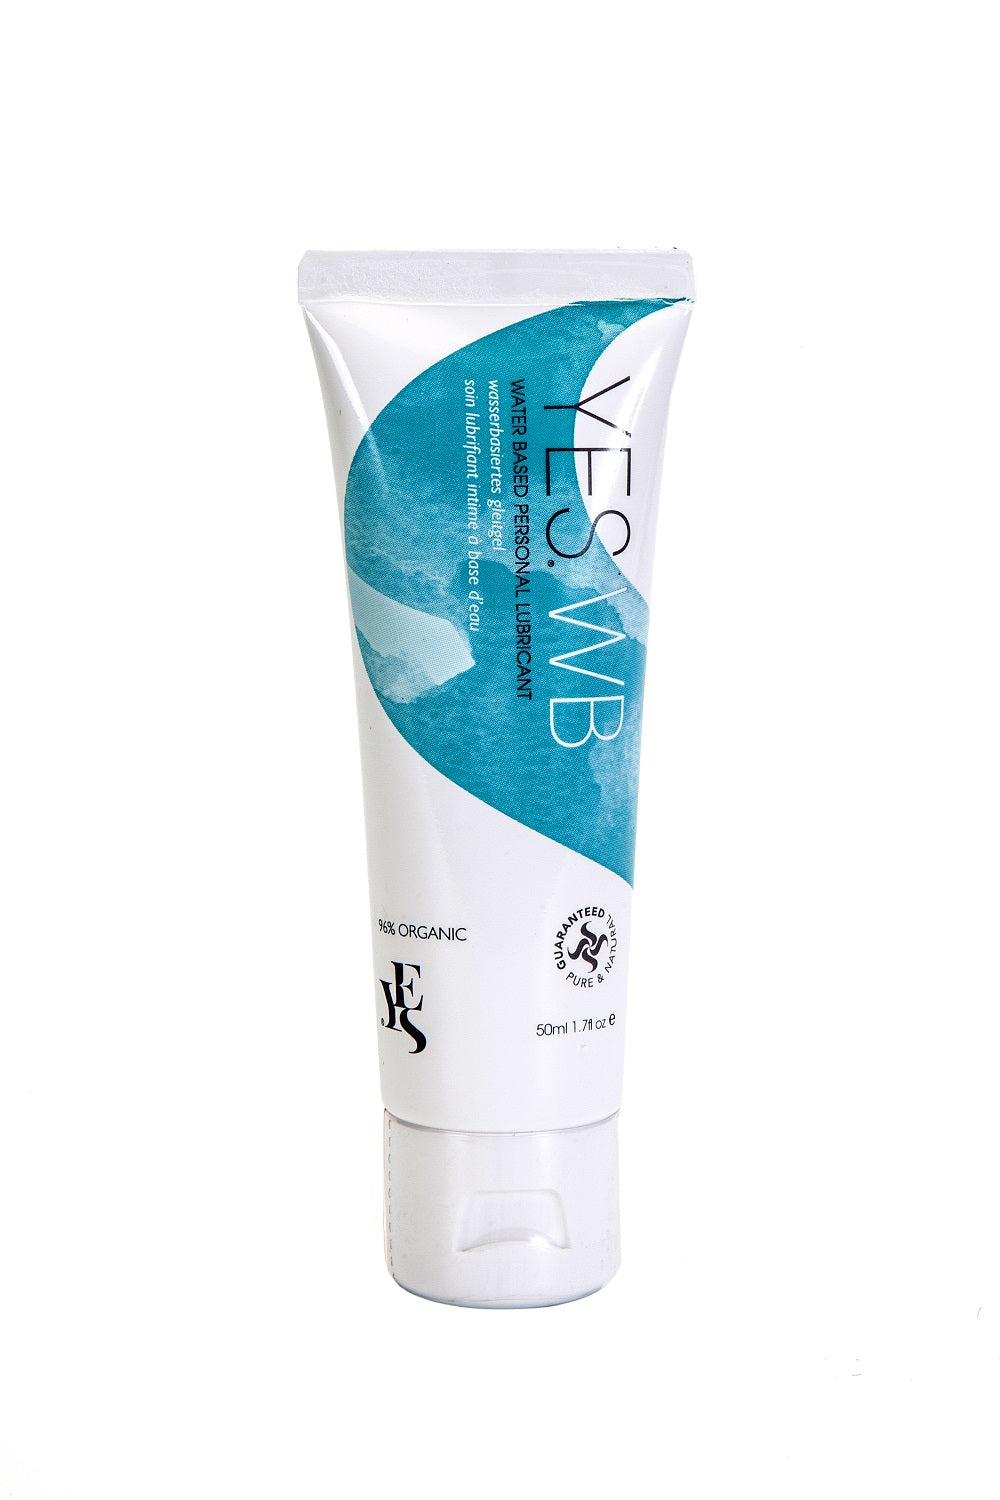 YES WB Lubricant Buy in Toronto online or in-store